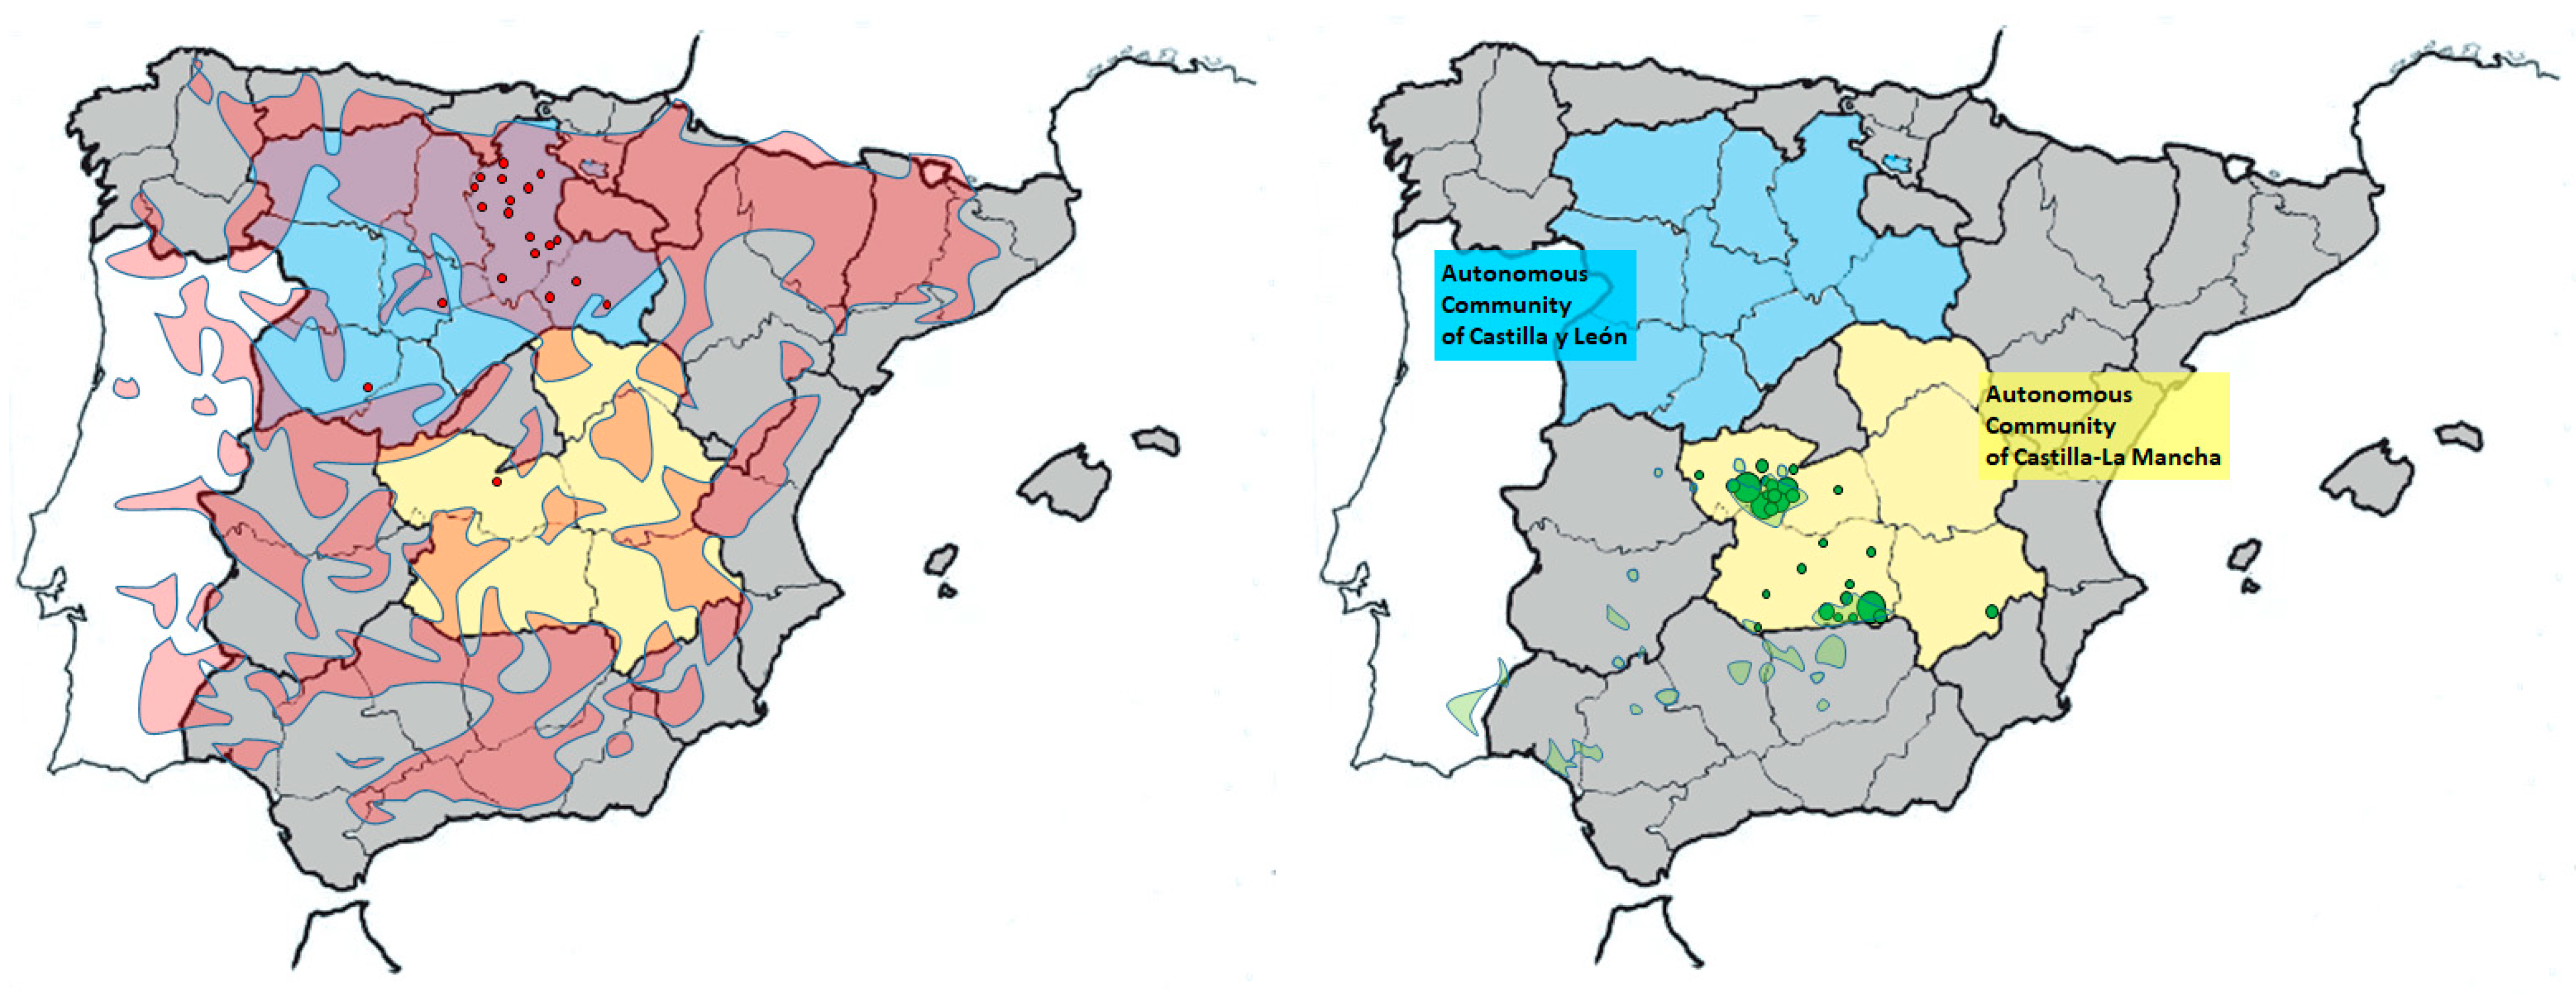 File:España Portugal divisiones.png - Wikimedia Commons